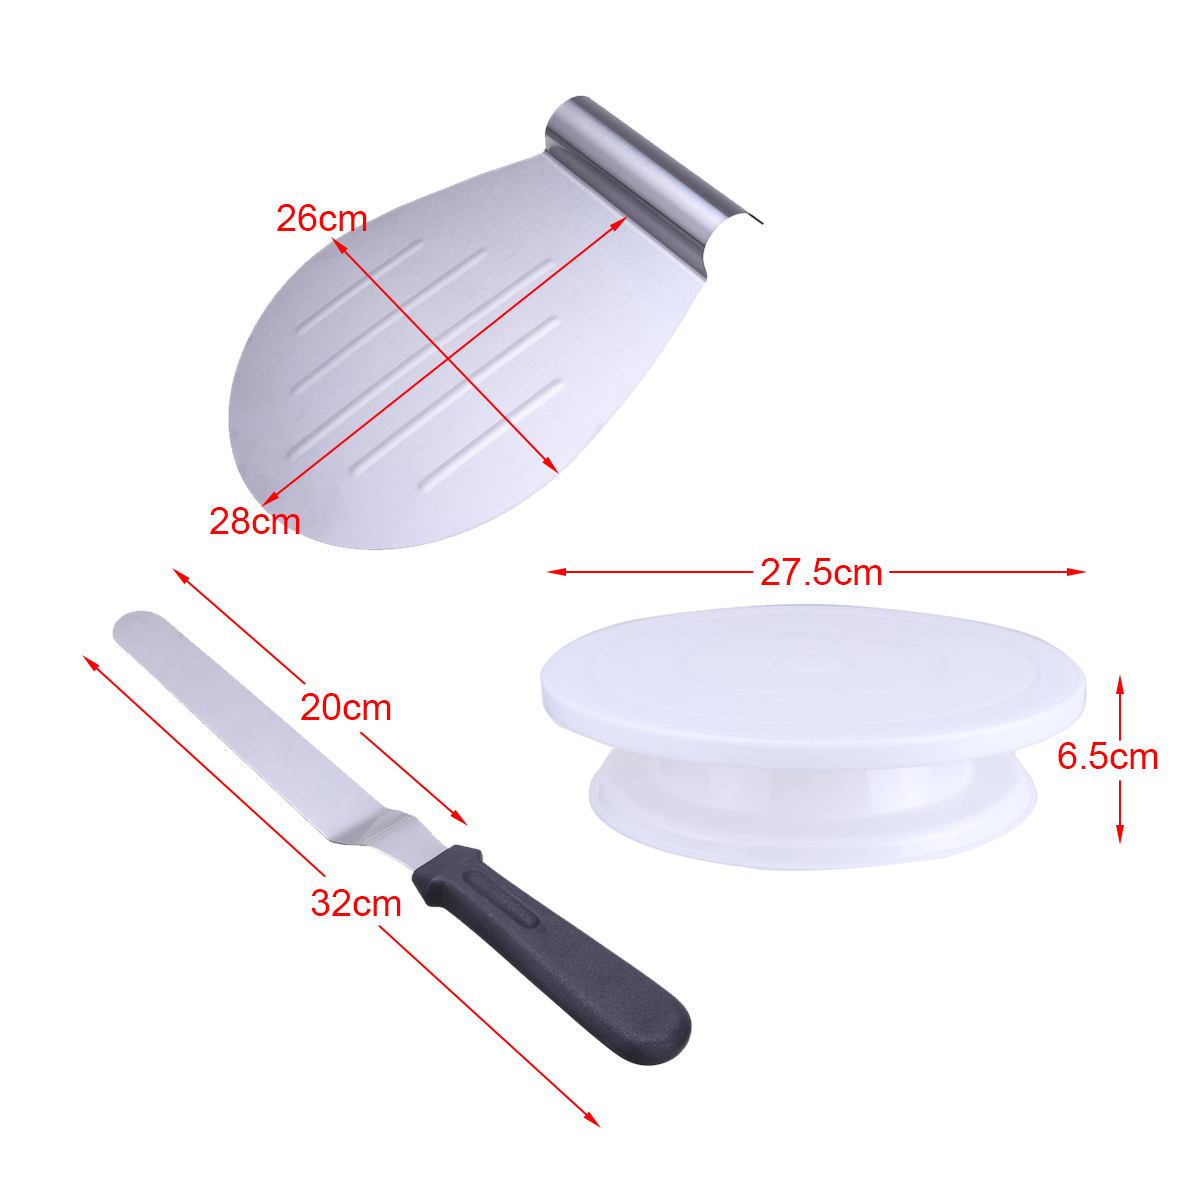 28cm-Rotating-Cake-Icing-Decorating-Revolving-Display-Stand-Turntable-Smoother-1515760-3